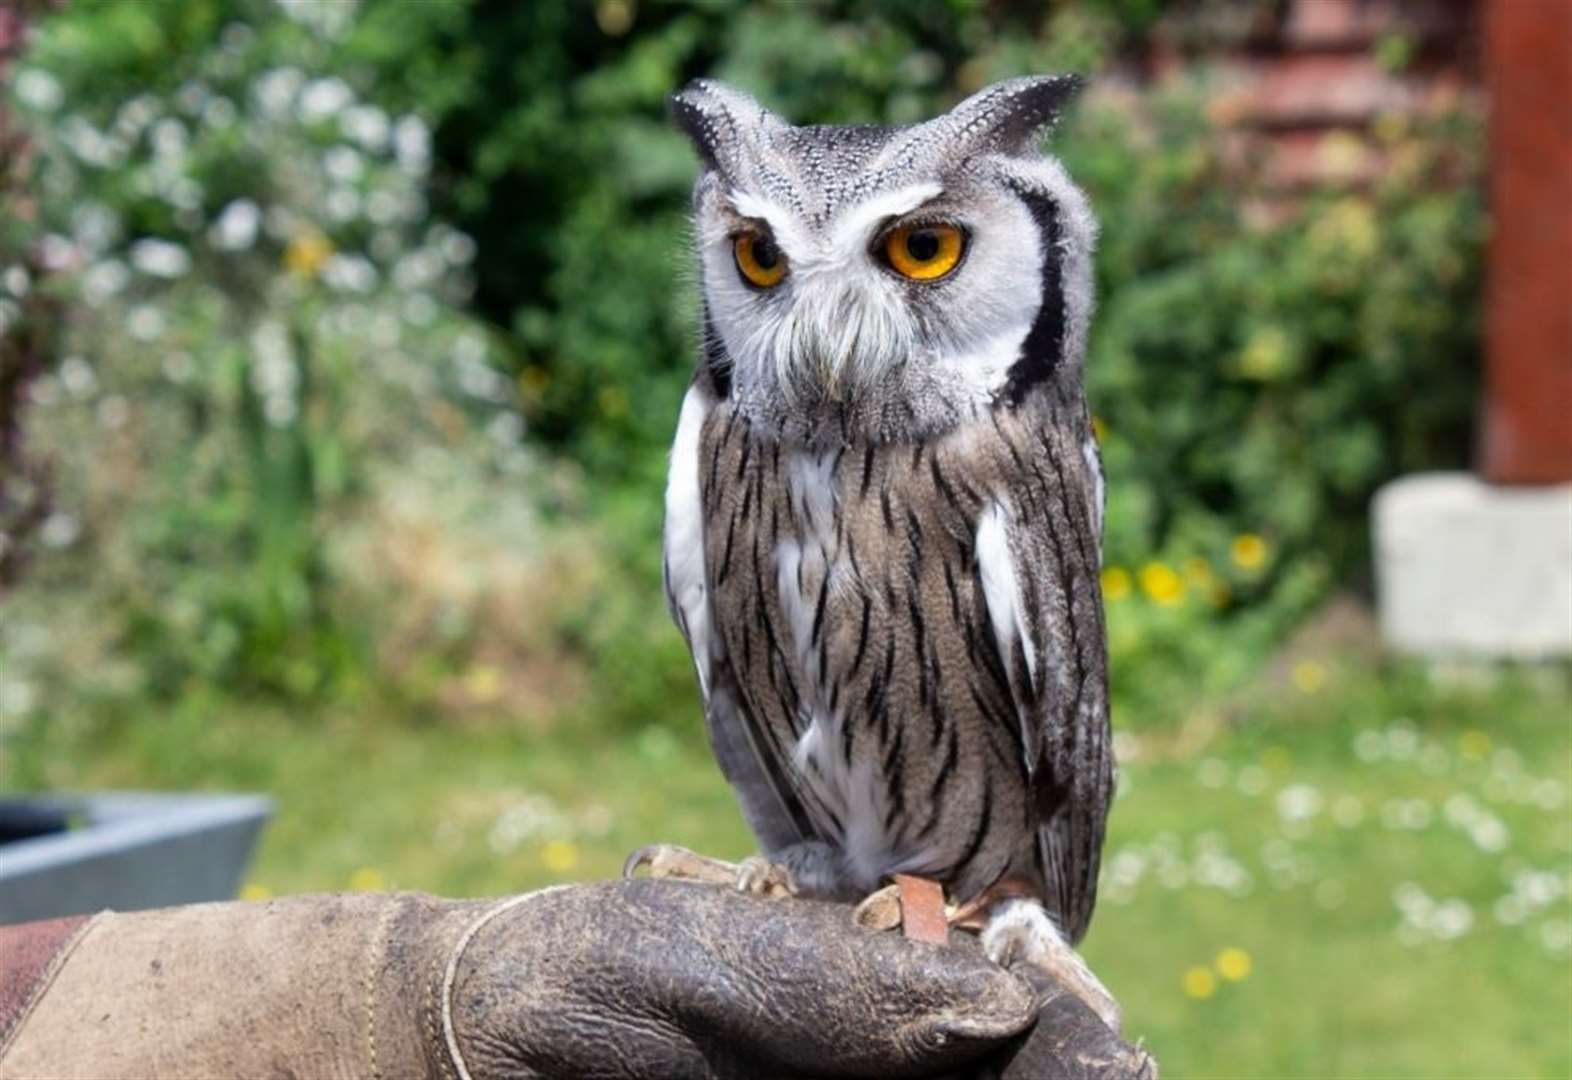 Birds of prey display team accused of operating illegally 